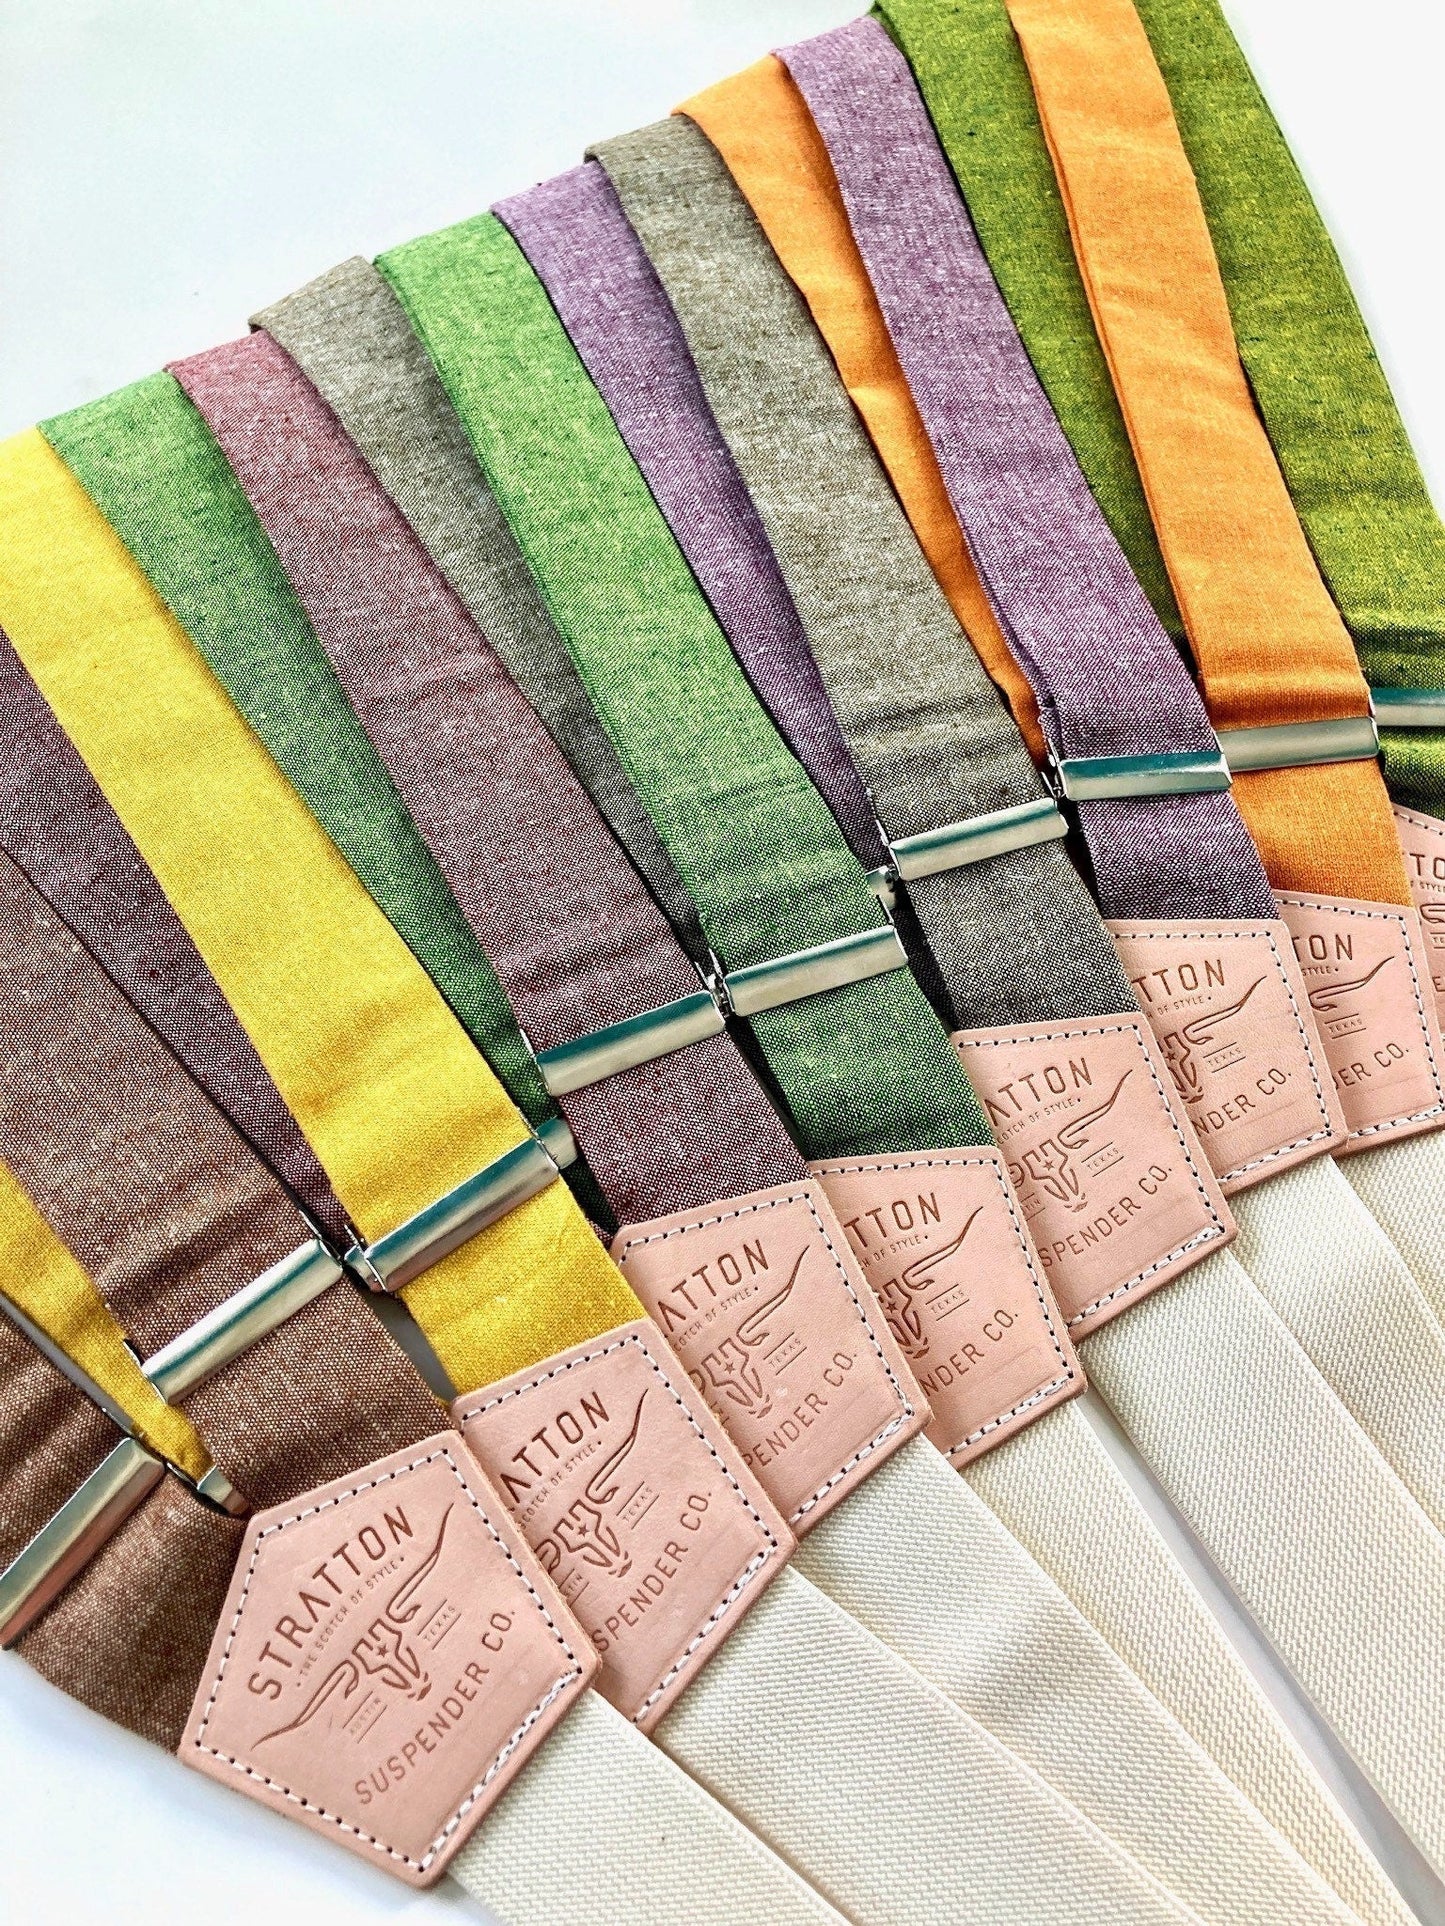 Stratton Suspender Co. Fall Linen Collection laid out in the following order: Nutmeg (Brown), Yellow, Maroon or Rust, Spruce (Bright Green), Olive Green, Purple, Orange, Palm (green and yellow woven linen)